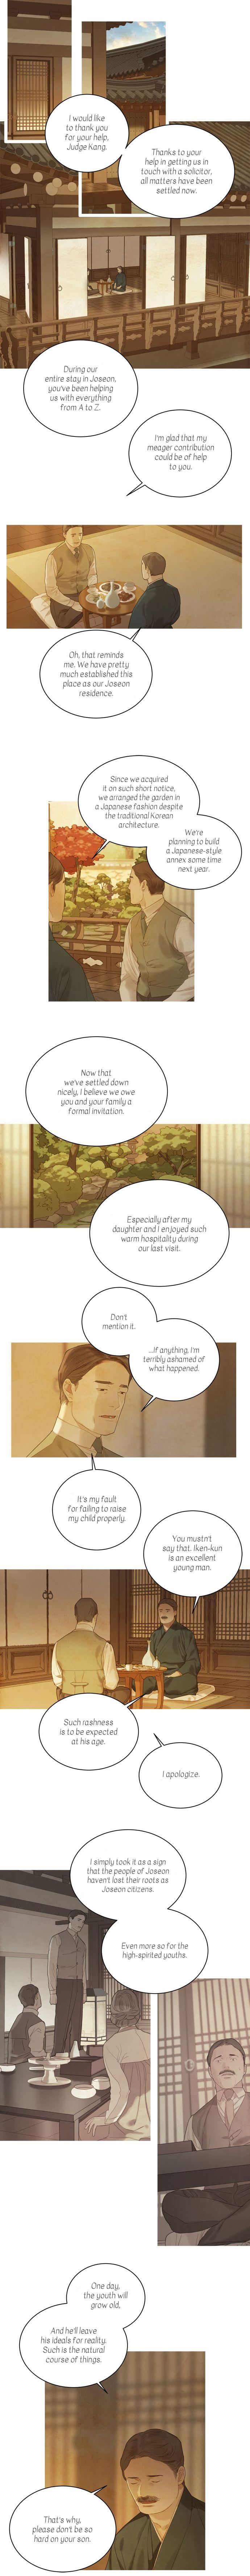 The Whale Star - The Gyeongseong Mermaid - Chapter 42 Page 3